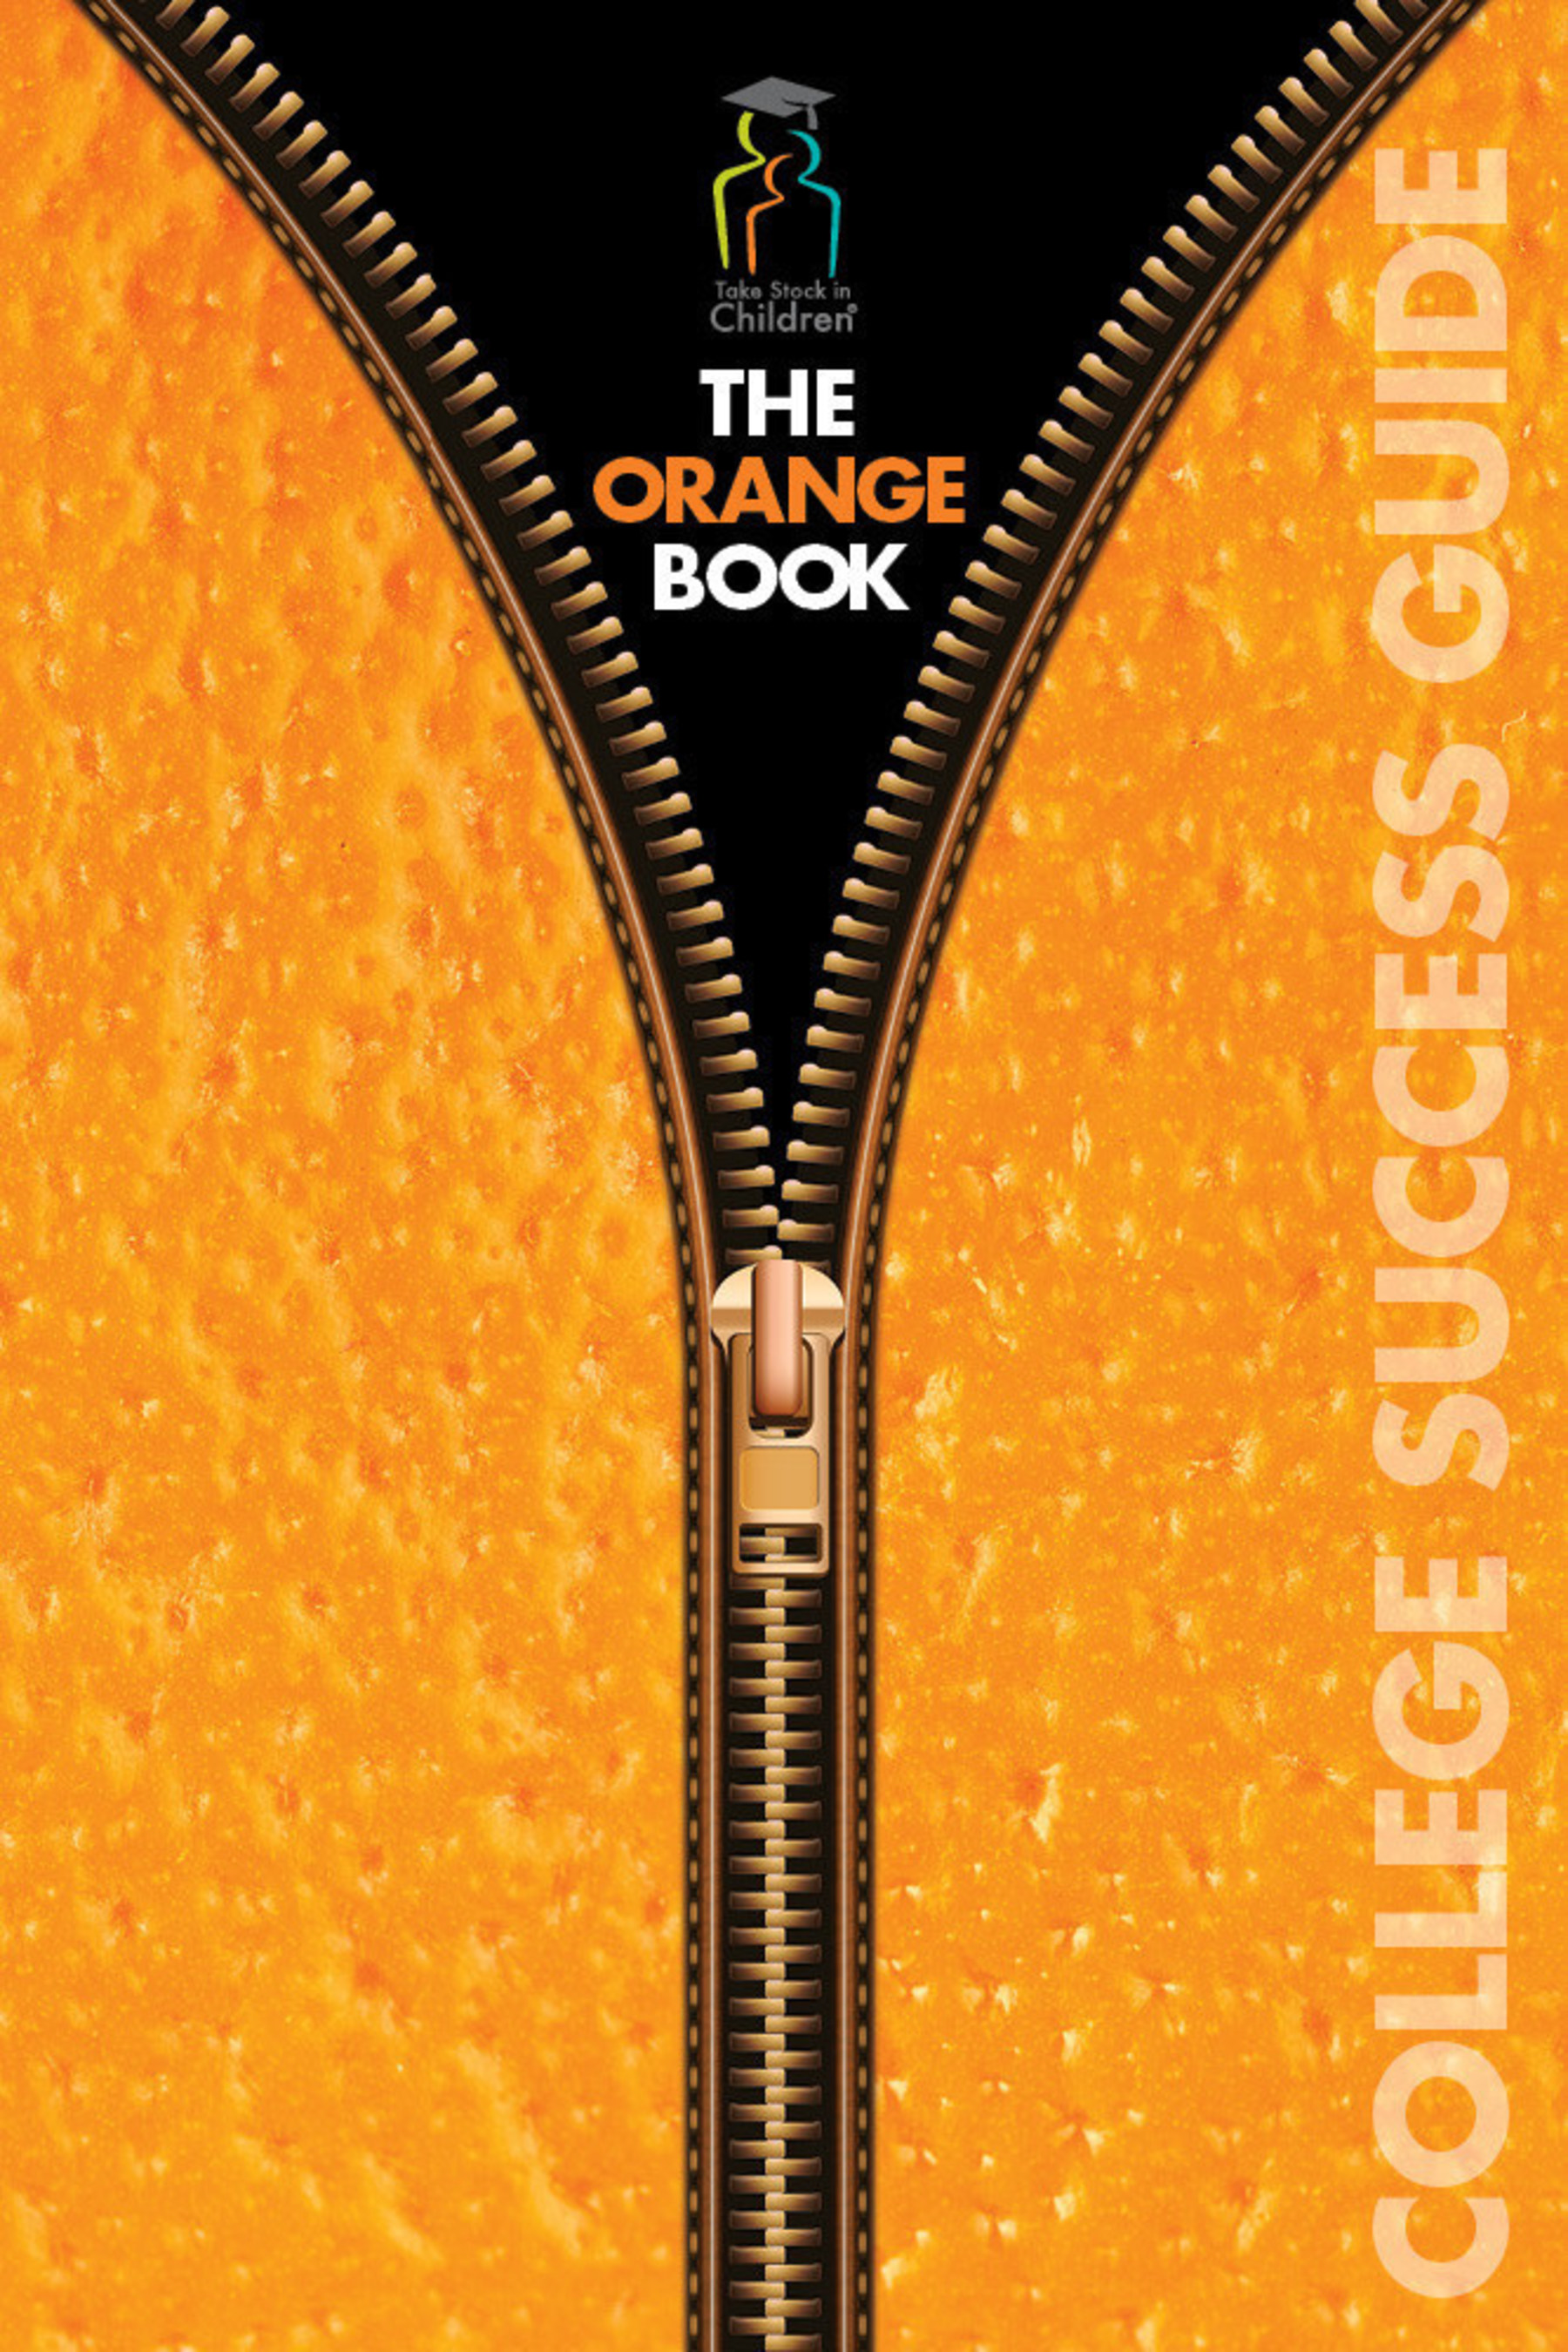 More than 1,800 Take Stock in Children high school seniors received The Orange Book College Success Guide to help them navigate through college. (PRNewsFoto/Take Stock in Children)